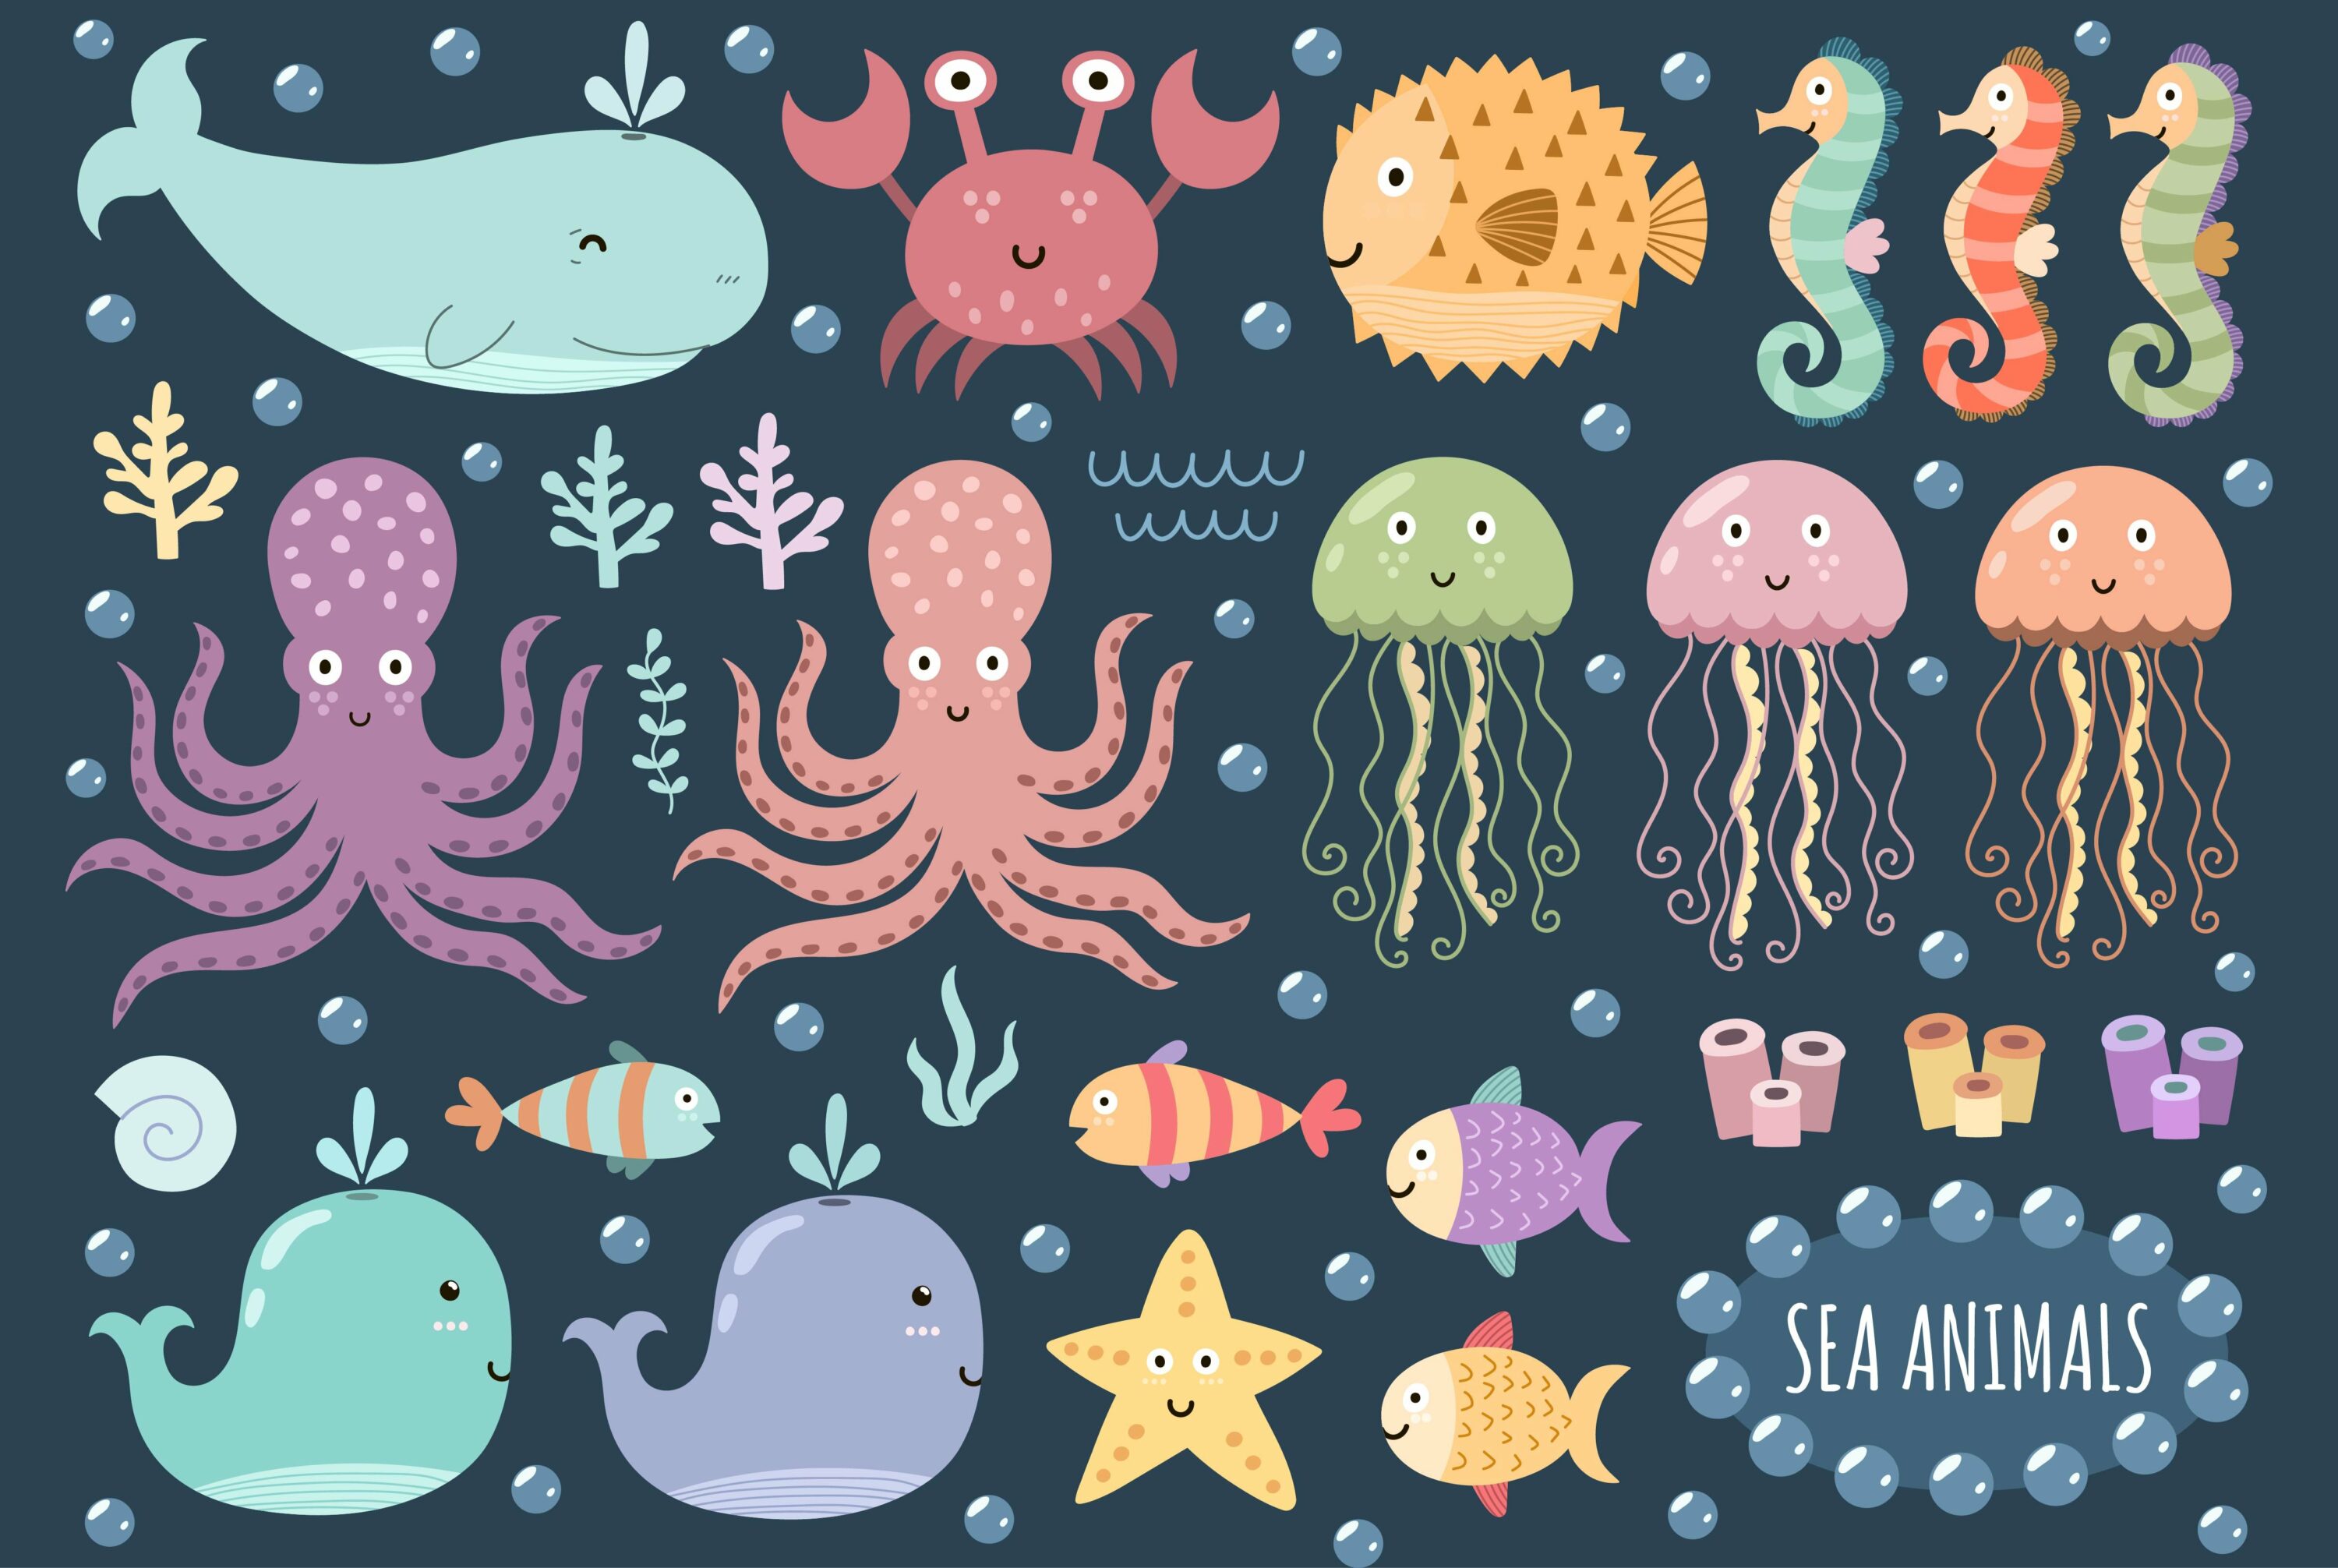 New cute collection with adorable seamless patterns, stickers, cards and characters of sea life. 